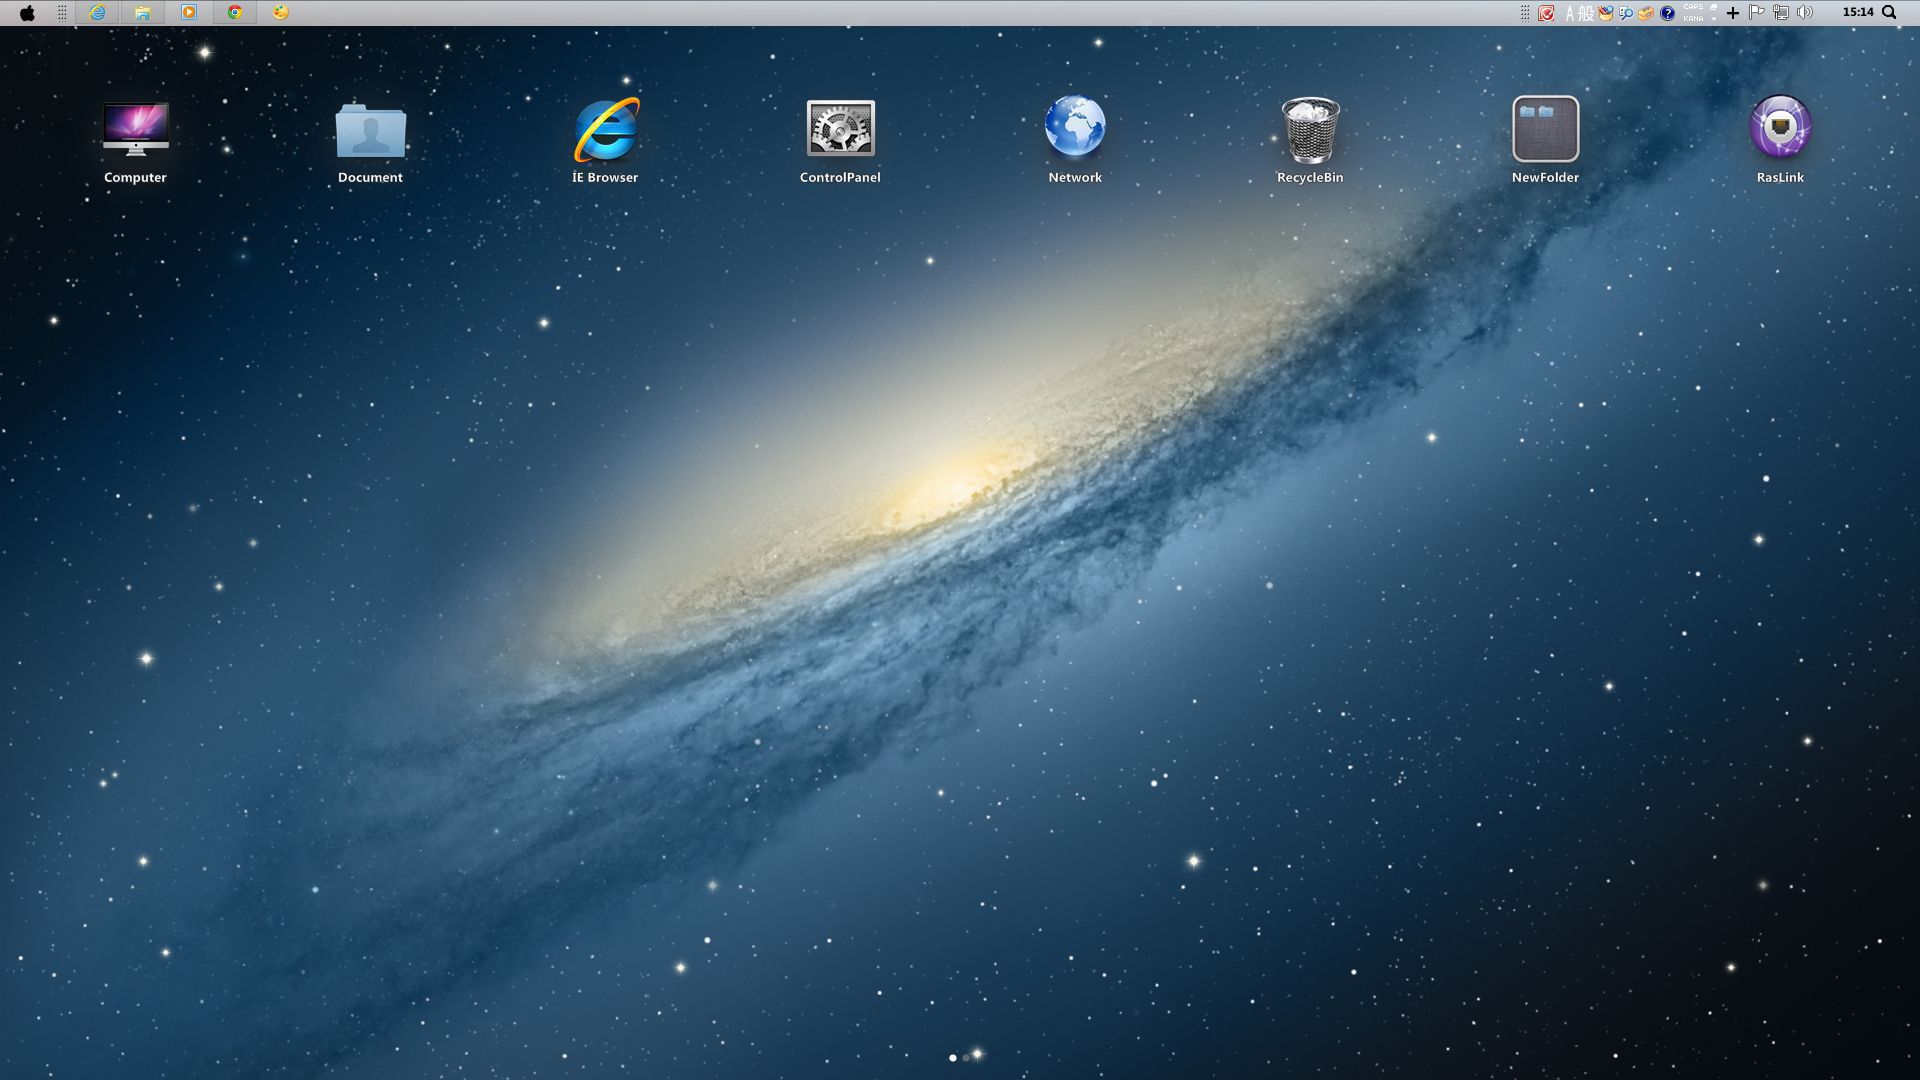 mac os x dock for windows 7 download